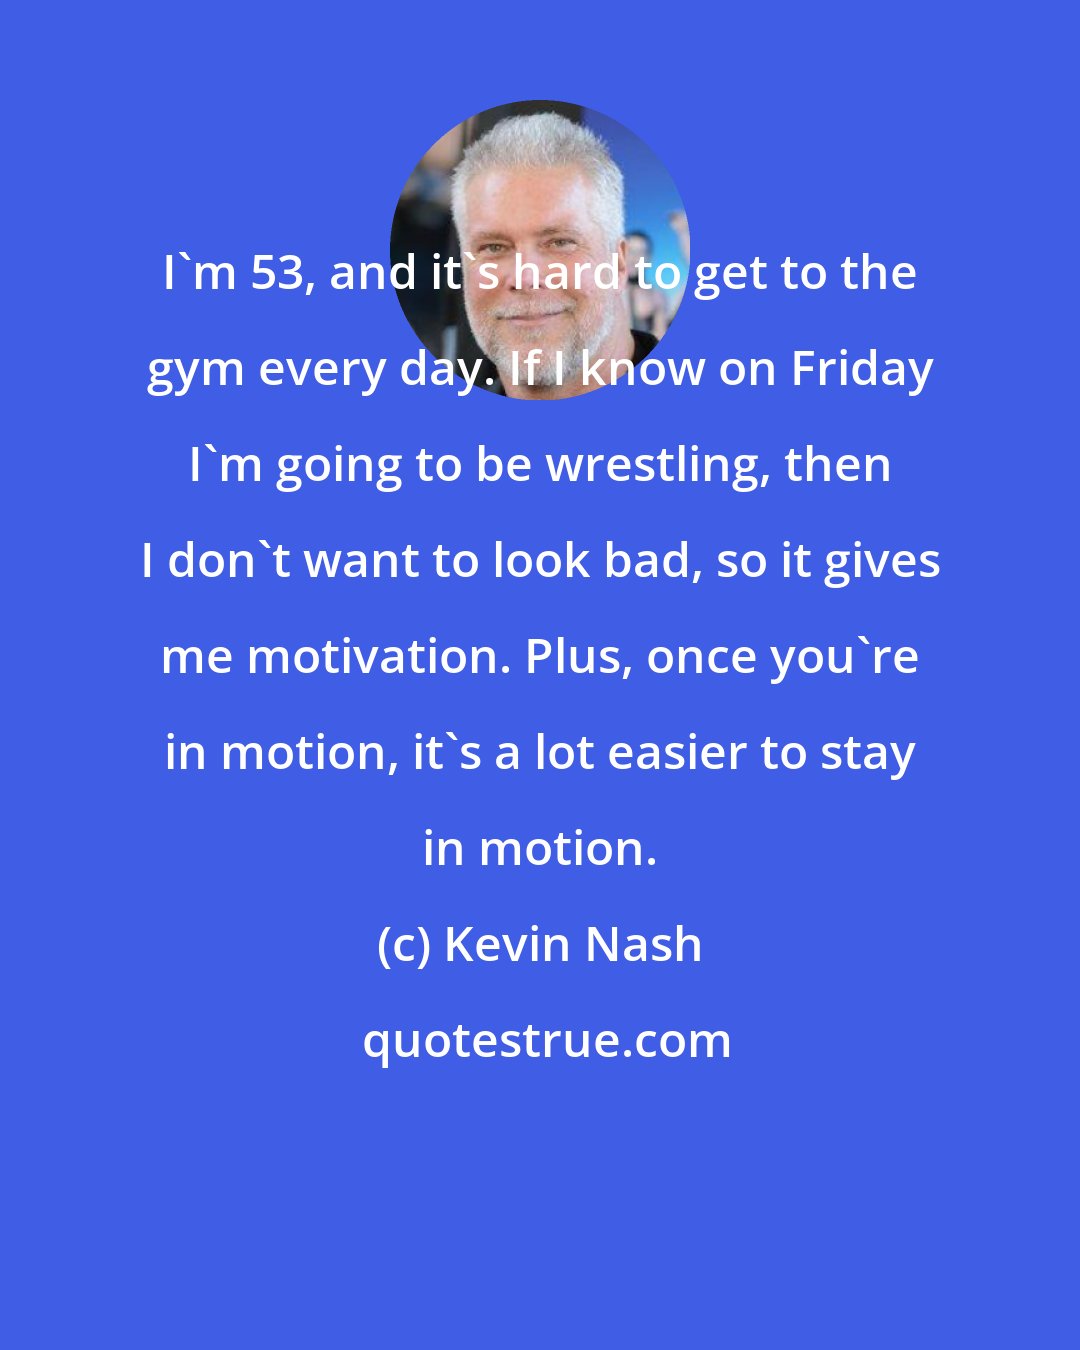 Kevin Nash: I'm 53, and it's hard to get to the gym every day. If I know on Friday I'm going to be wrestling, then I don't want to look bad, so it gives me motivation. Plus, once you're in motion, it's a lot easier to stay in motion.